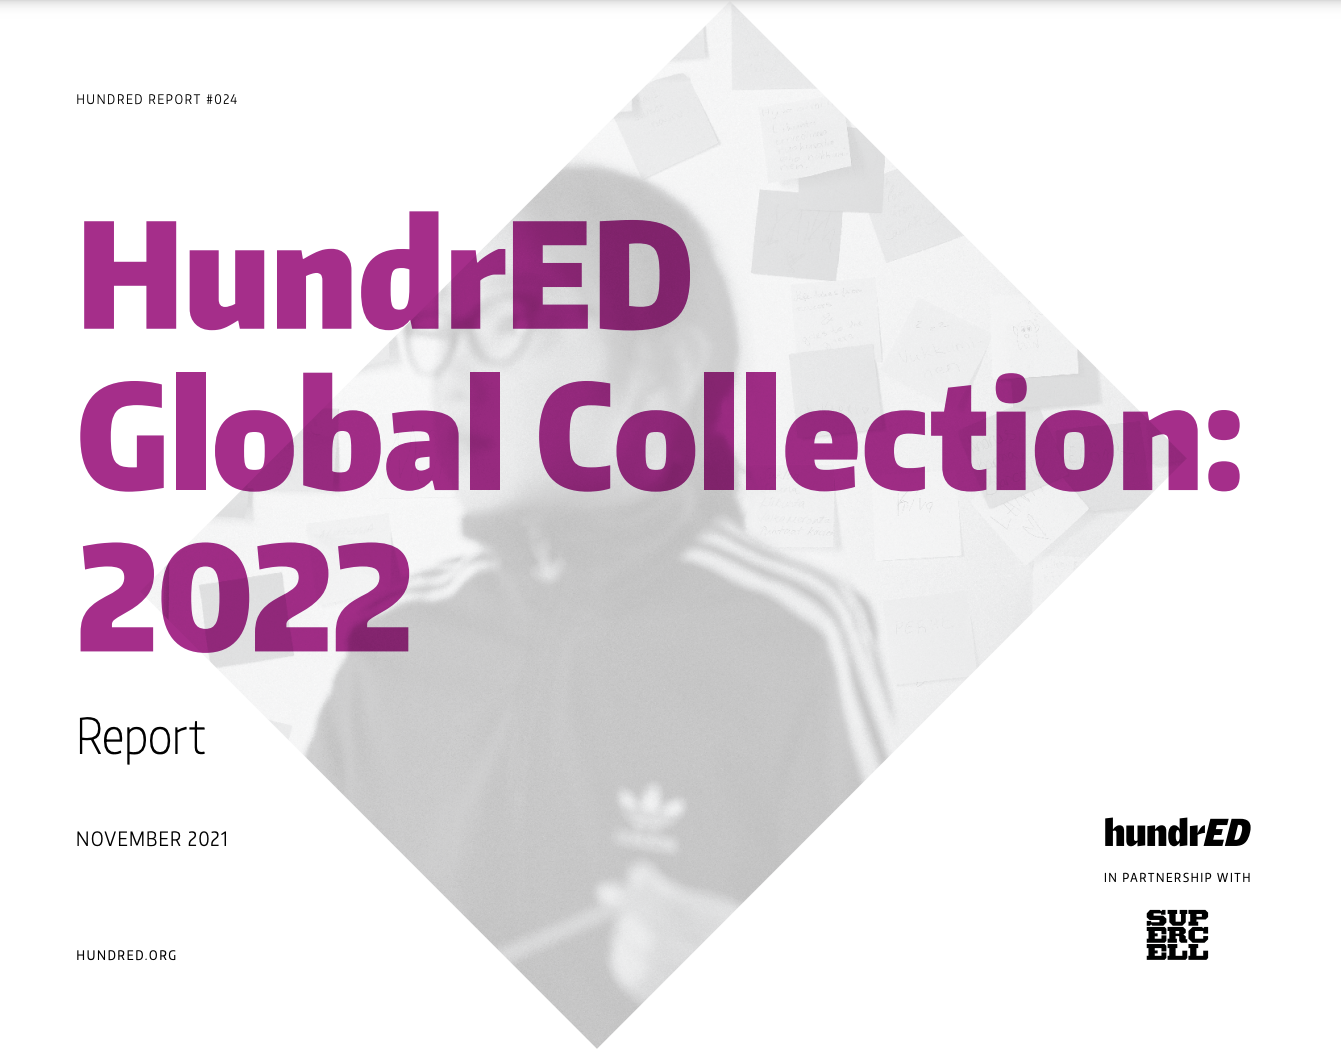 ProFuturo, one more year among the 100 educational innovations selected by HundrED